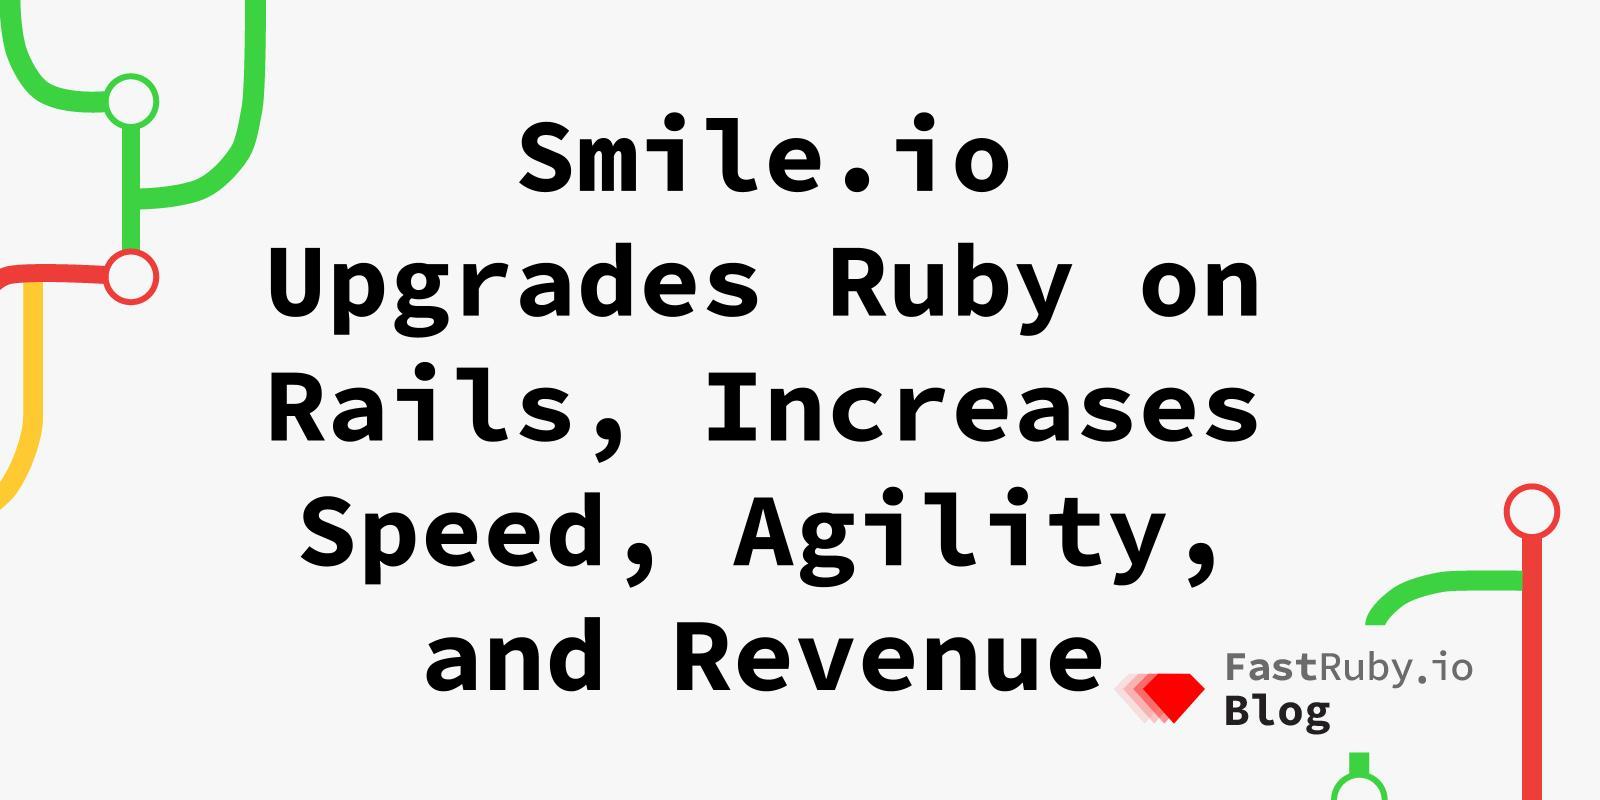 Smile.io Upgrades Ruby on Rails, Increases Speed, Agility, and Revenue